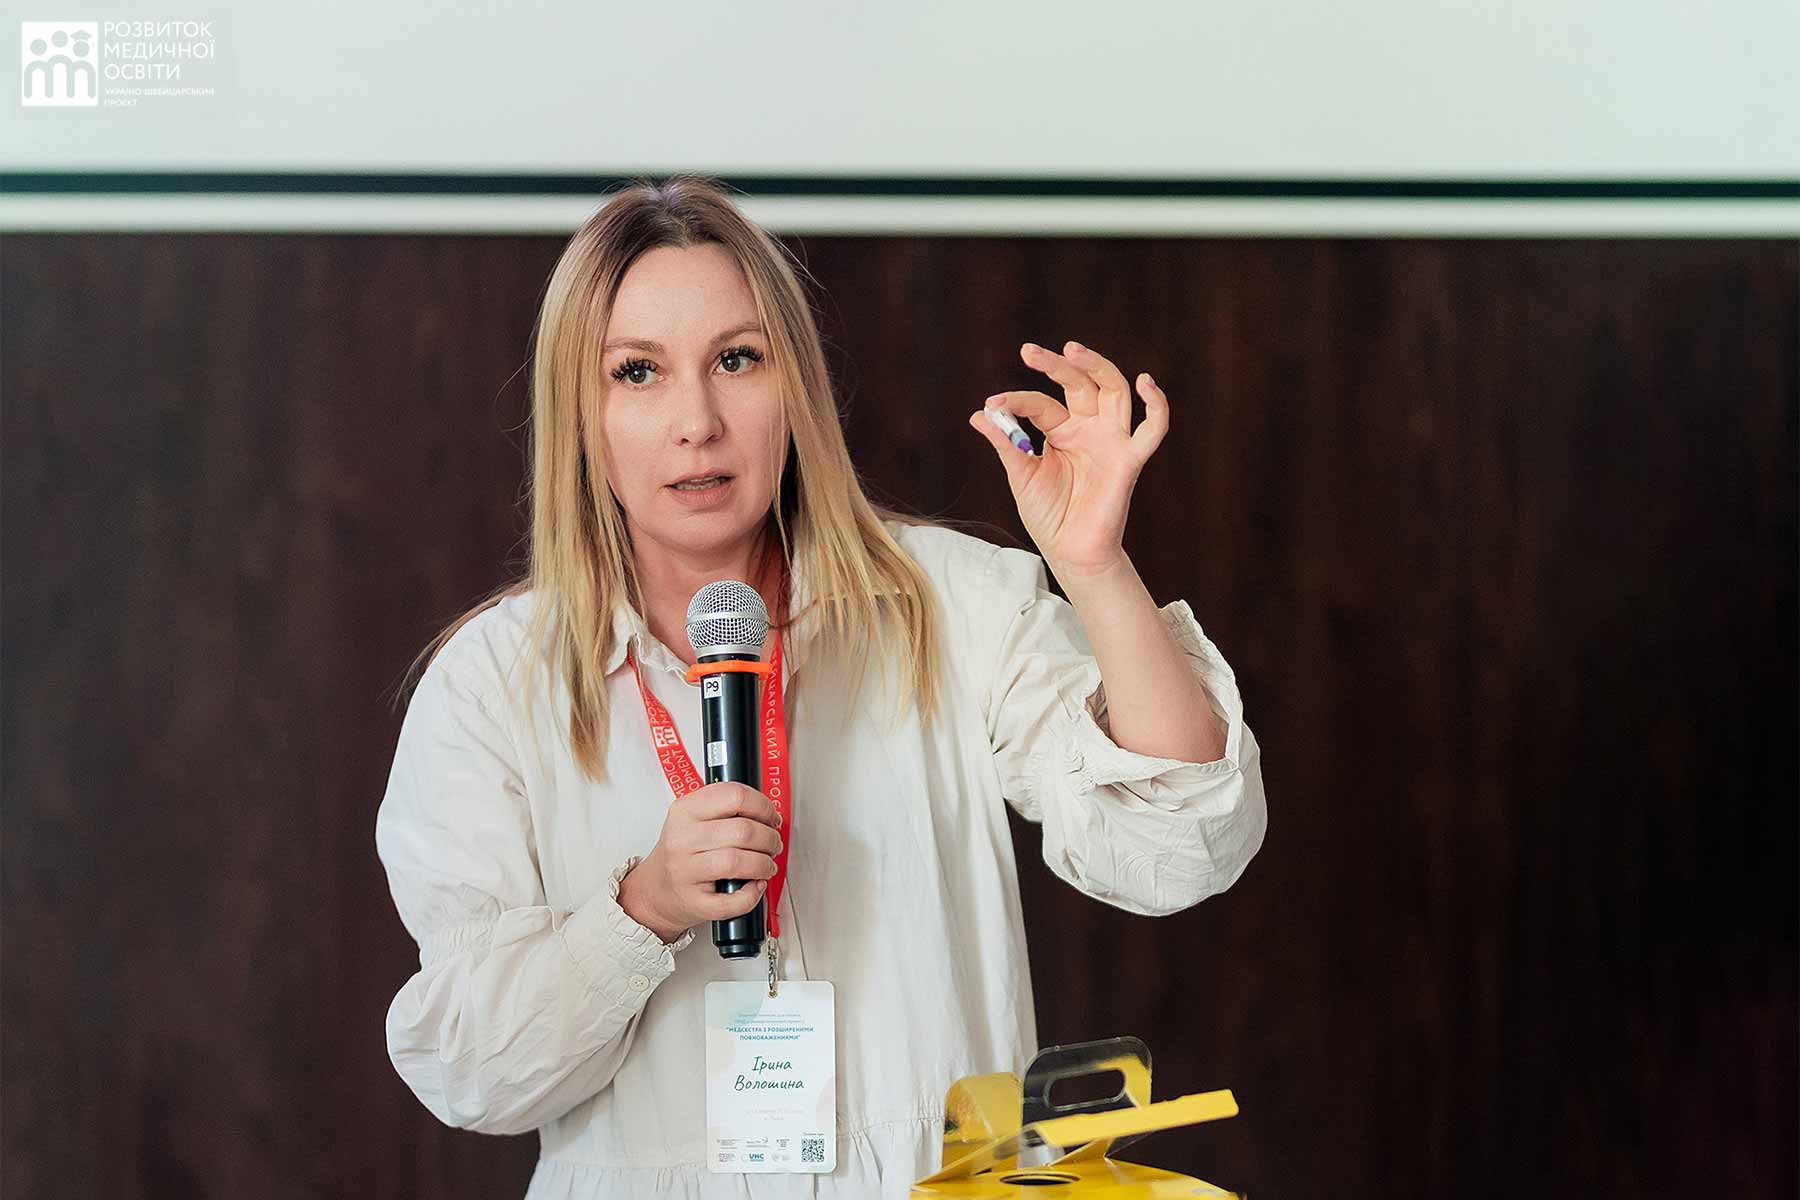 Family doctor Irina Voloshina, member of the Board of the Academy of Family Medicine of Ukraine, during a discussion about the challenges doctors face to provide assistance amid the war. © Medical Education Development Project